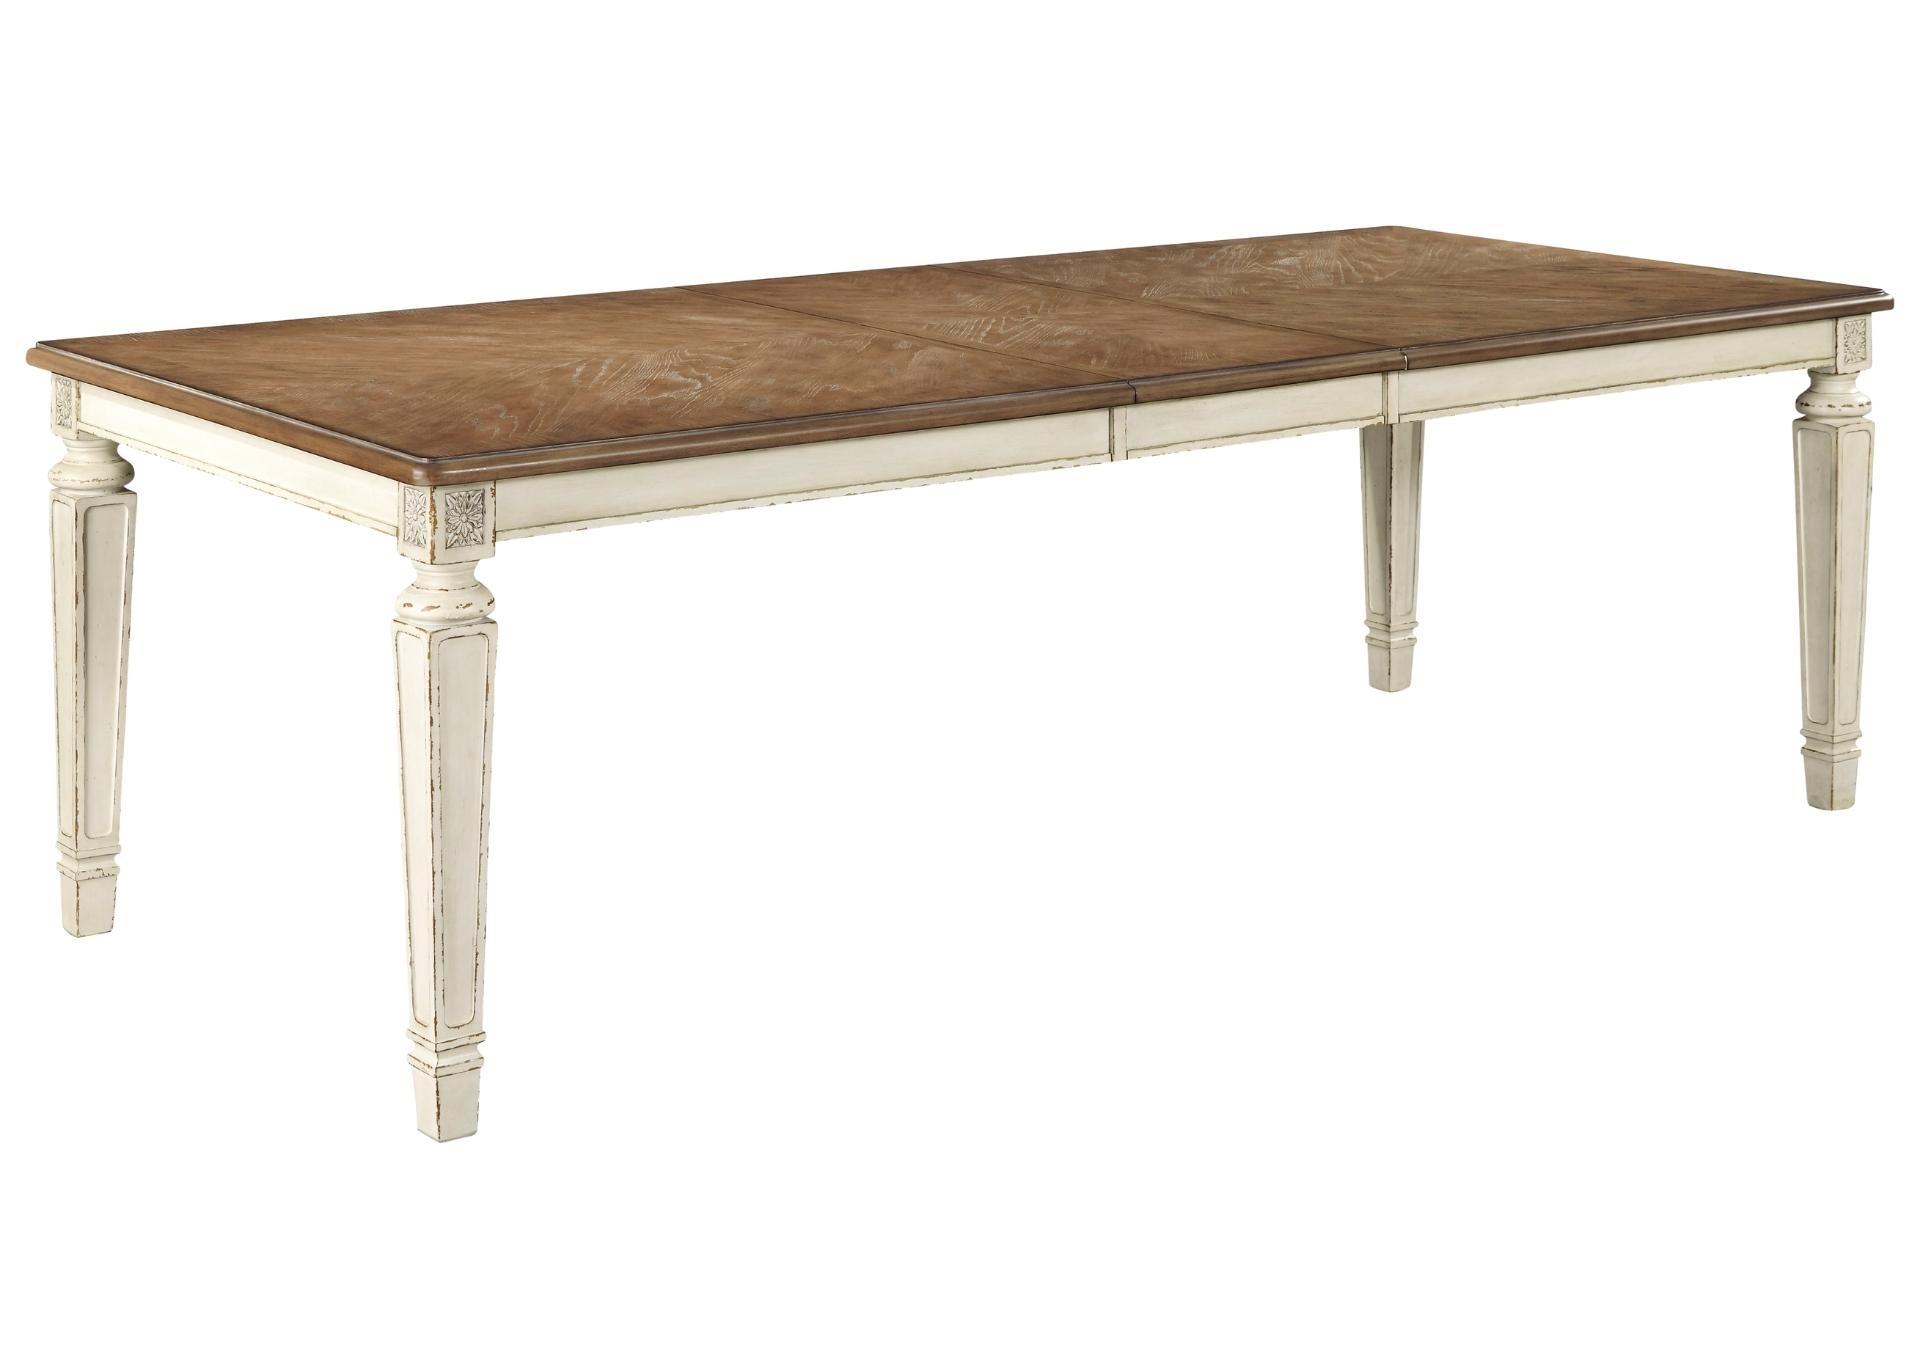 REALYN RECT DINING ROOM EXT TABLE